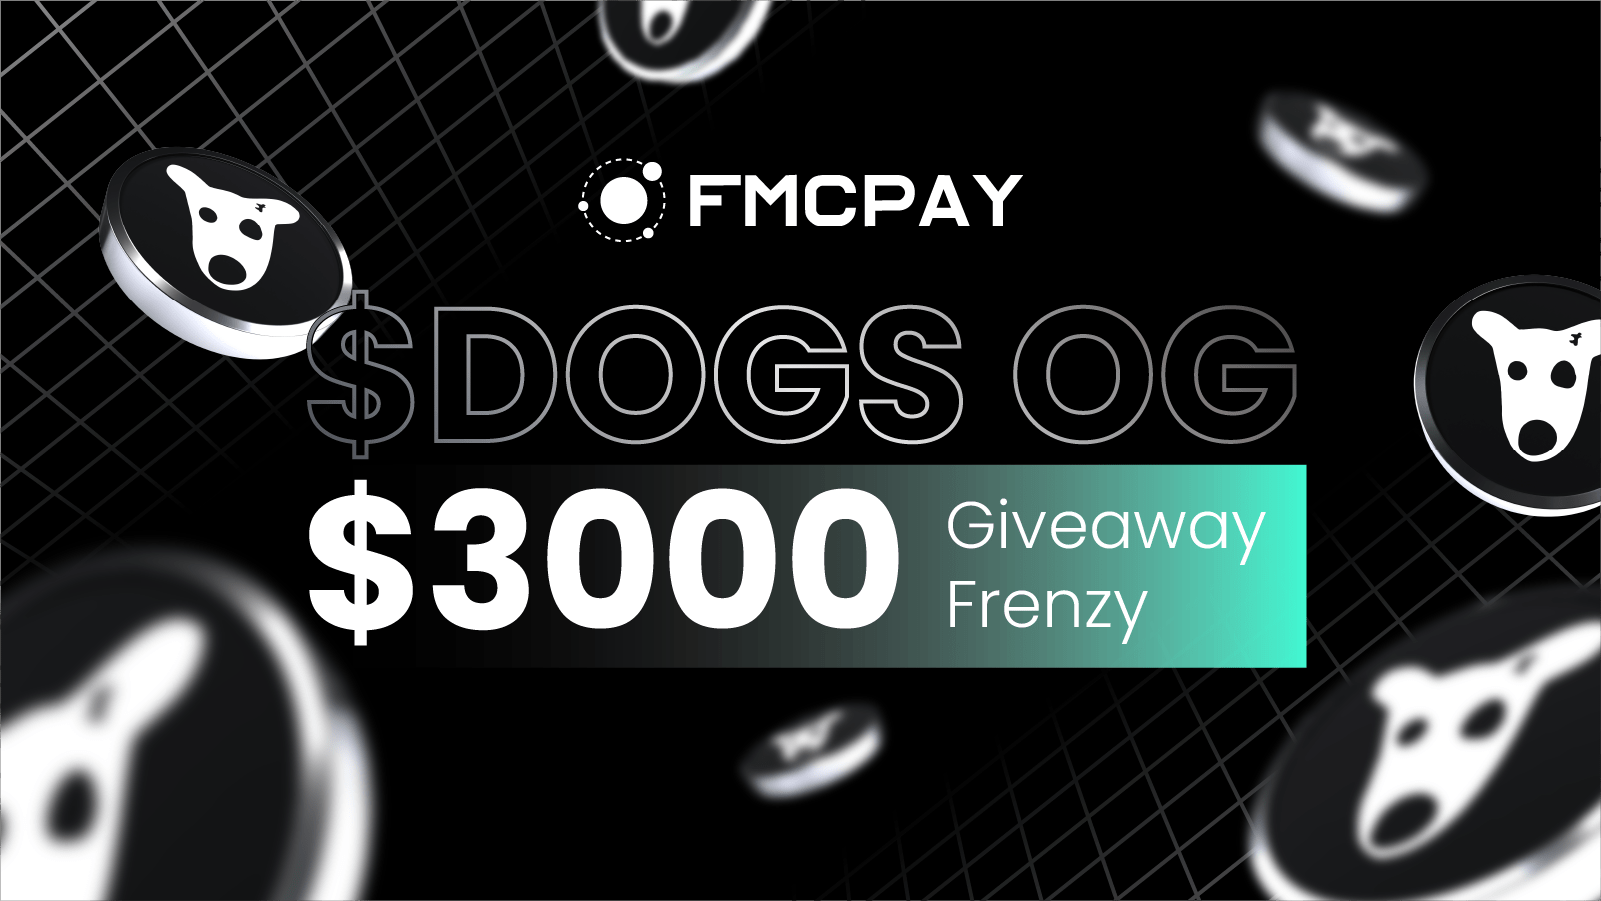 fmcpay unleash the crypto pup party 3000 dogs og giveaway frenzy